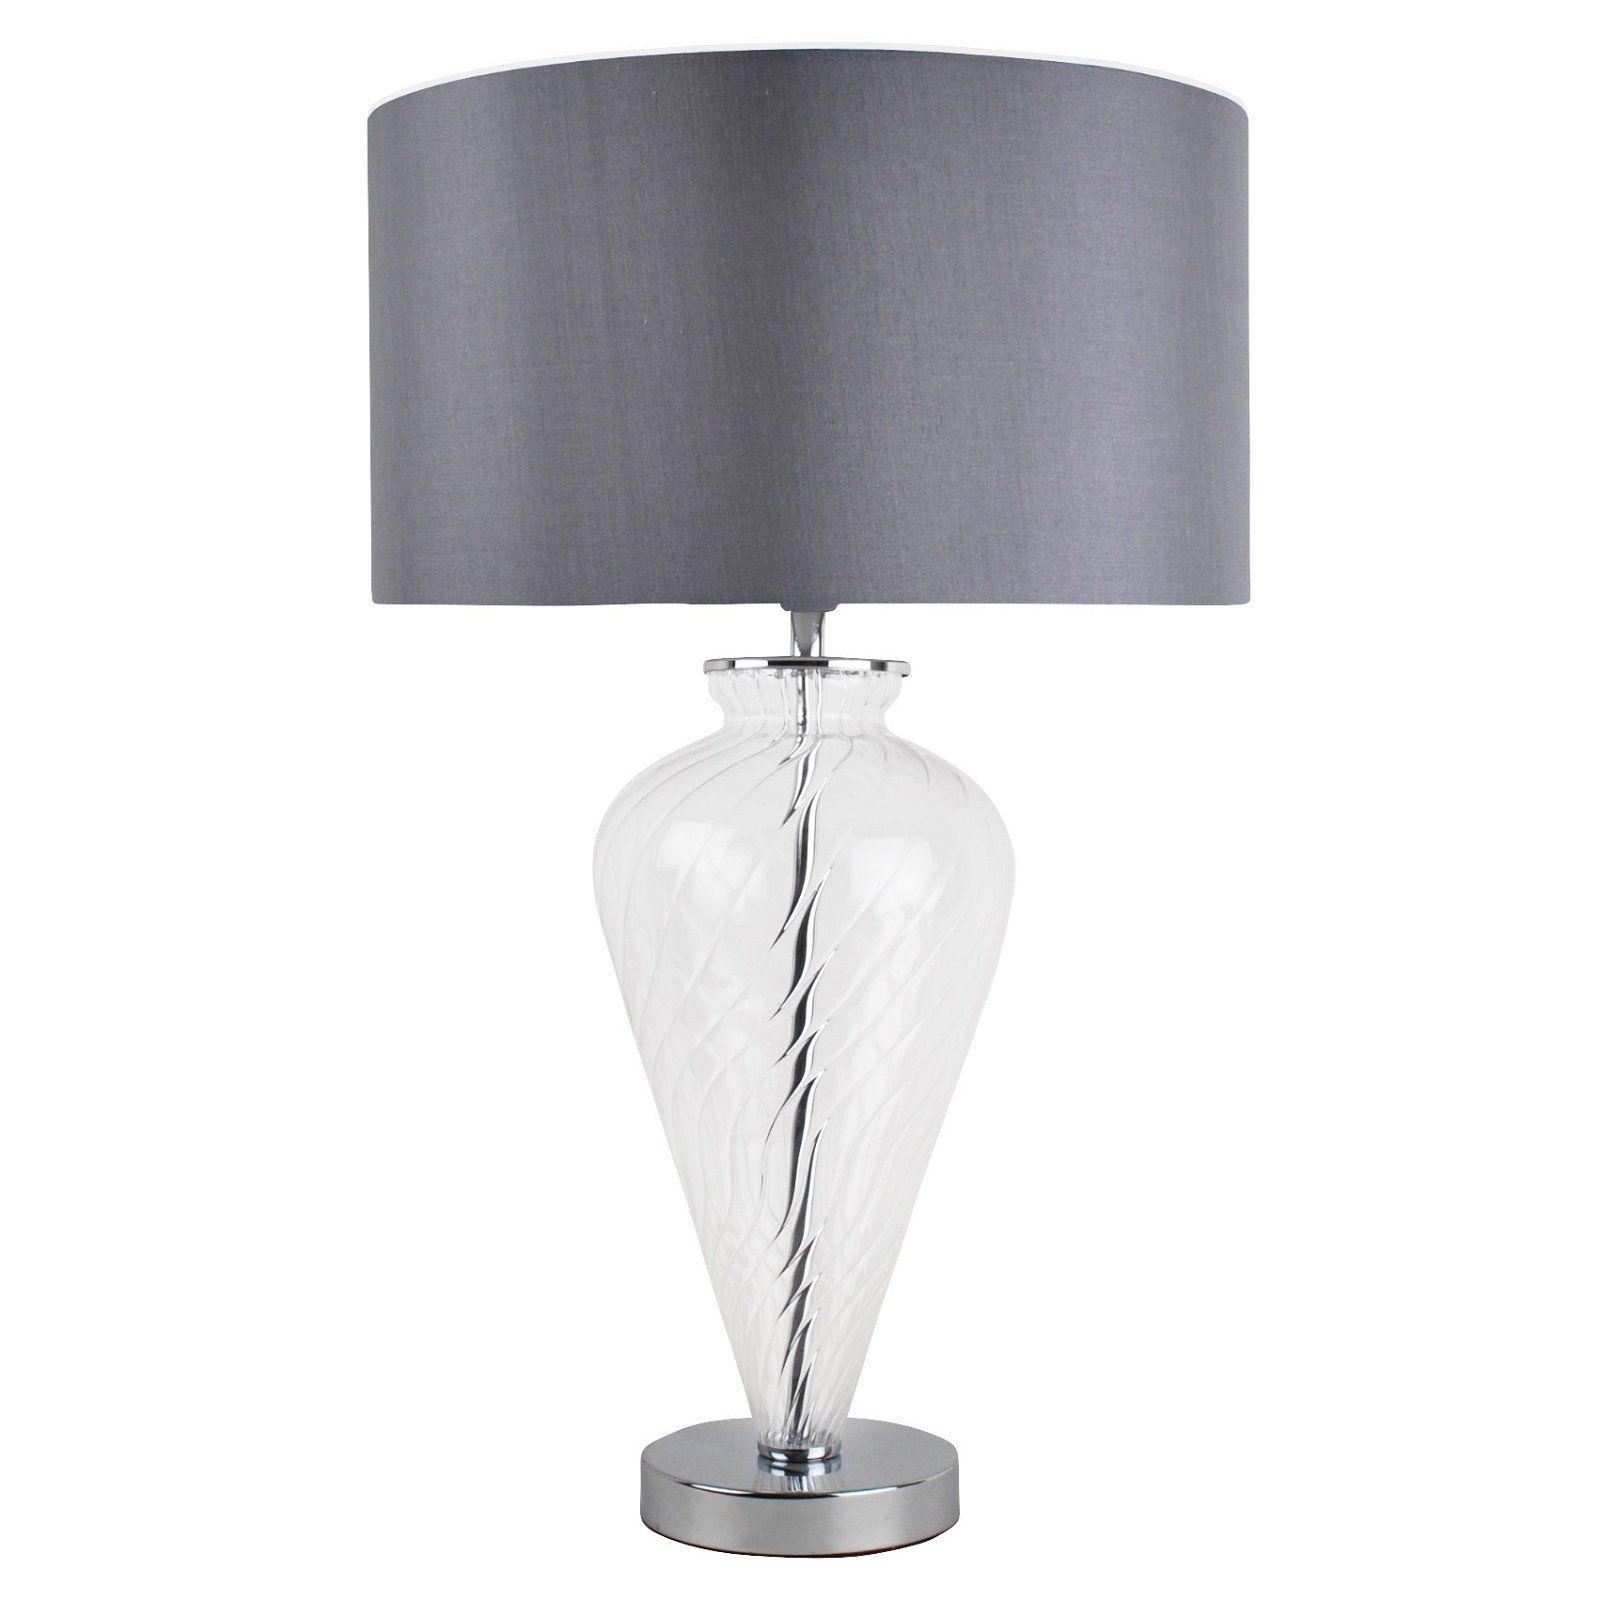 Best And Newest Clear Glass Table Lamp With Grey Fabric Shade Regarding Clear Glass Floor Lamps (View 12 of 15)